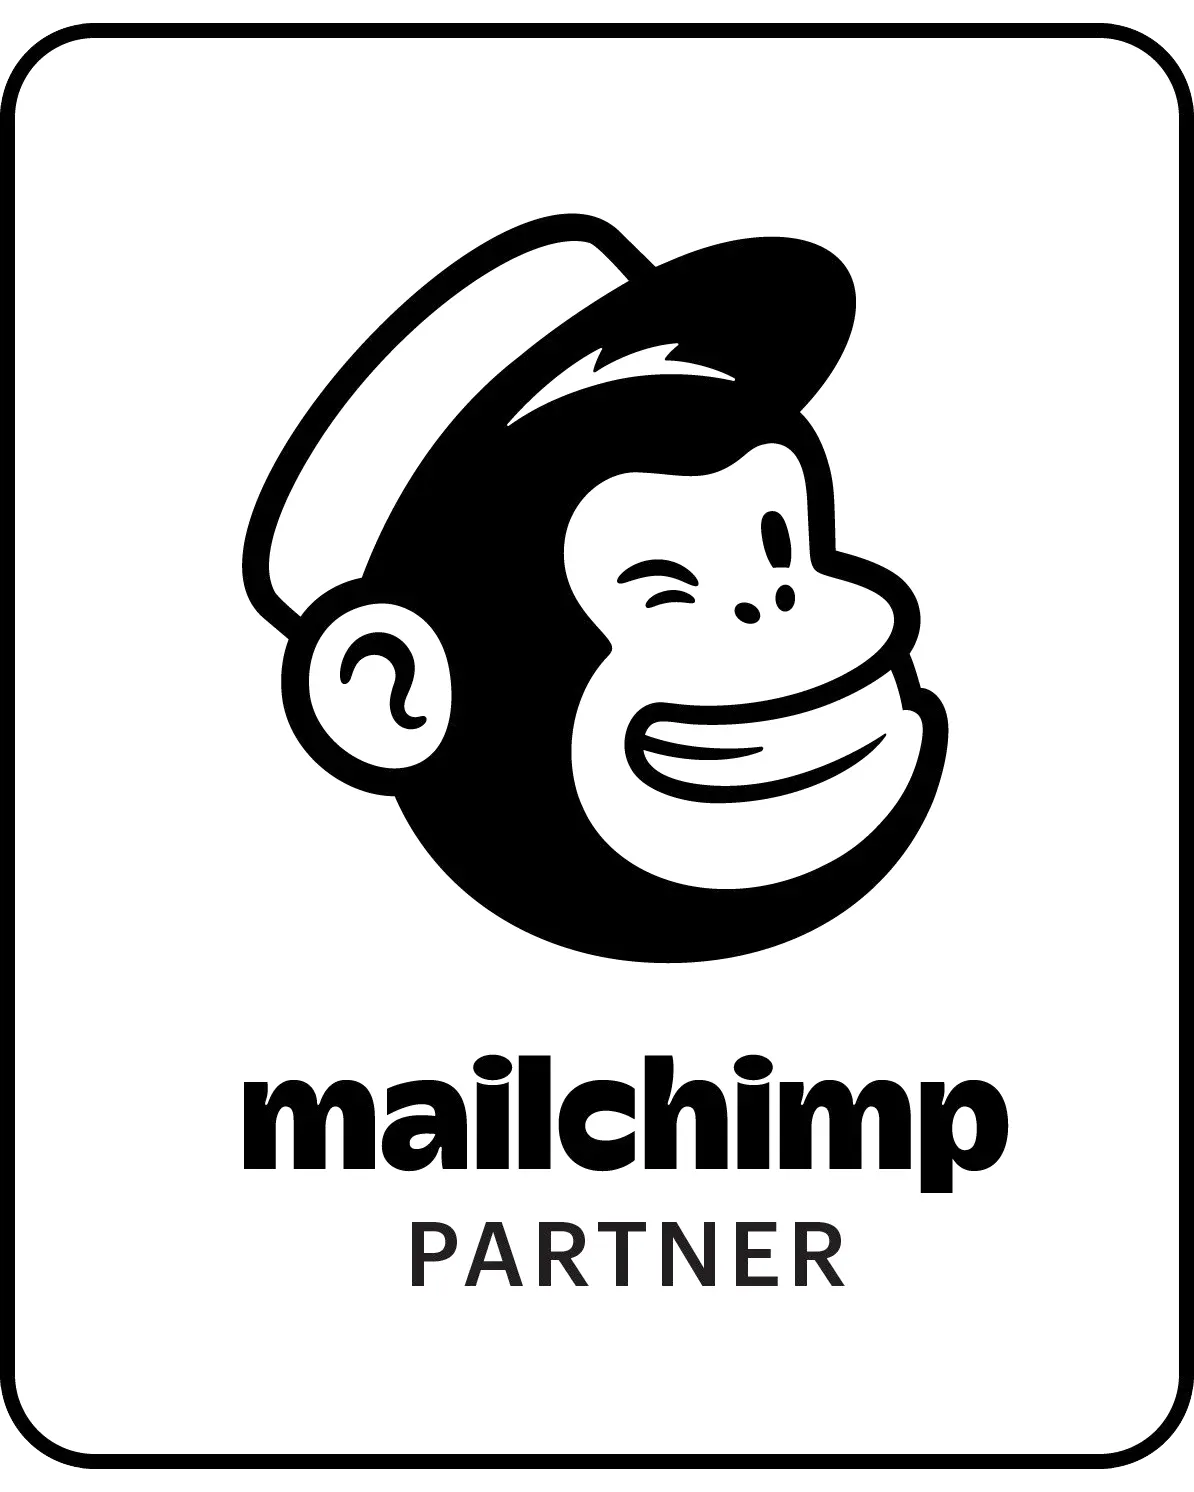 Graphic certifying WunderTRE as a Mailchimp Partner